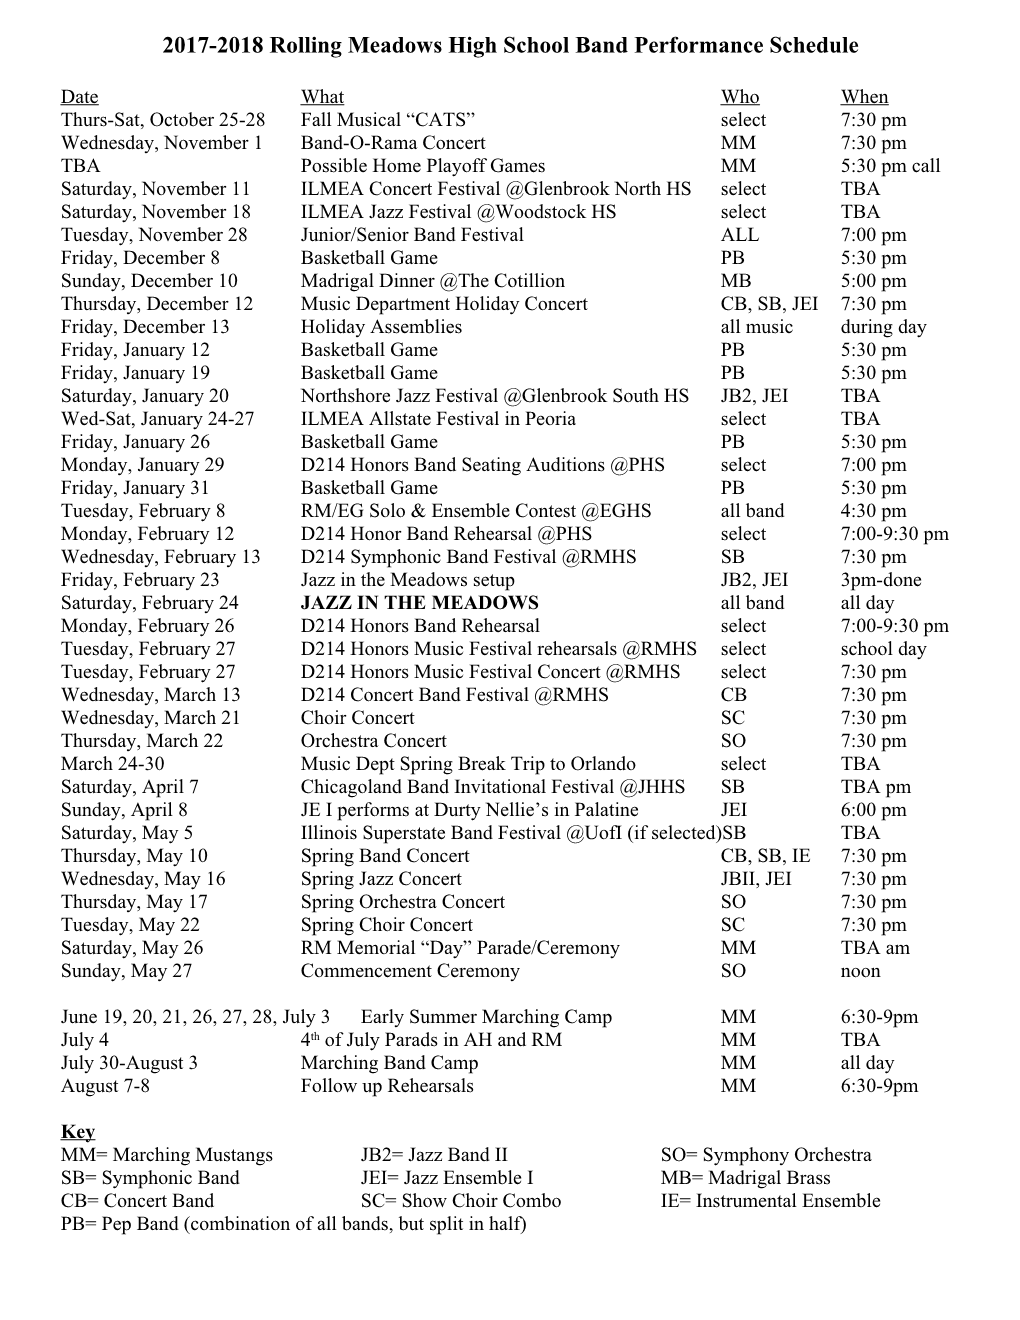 2008 Fall Color Guard Practice and Performance Schedule